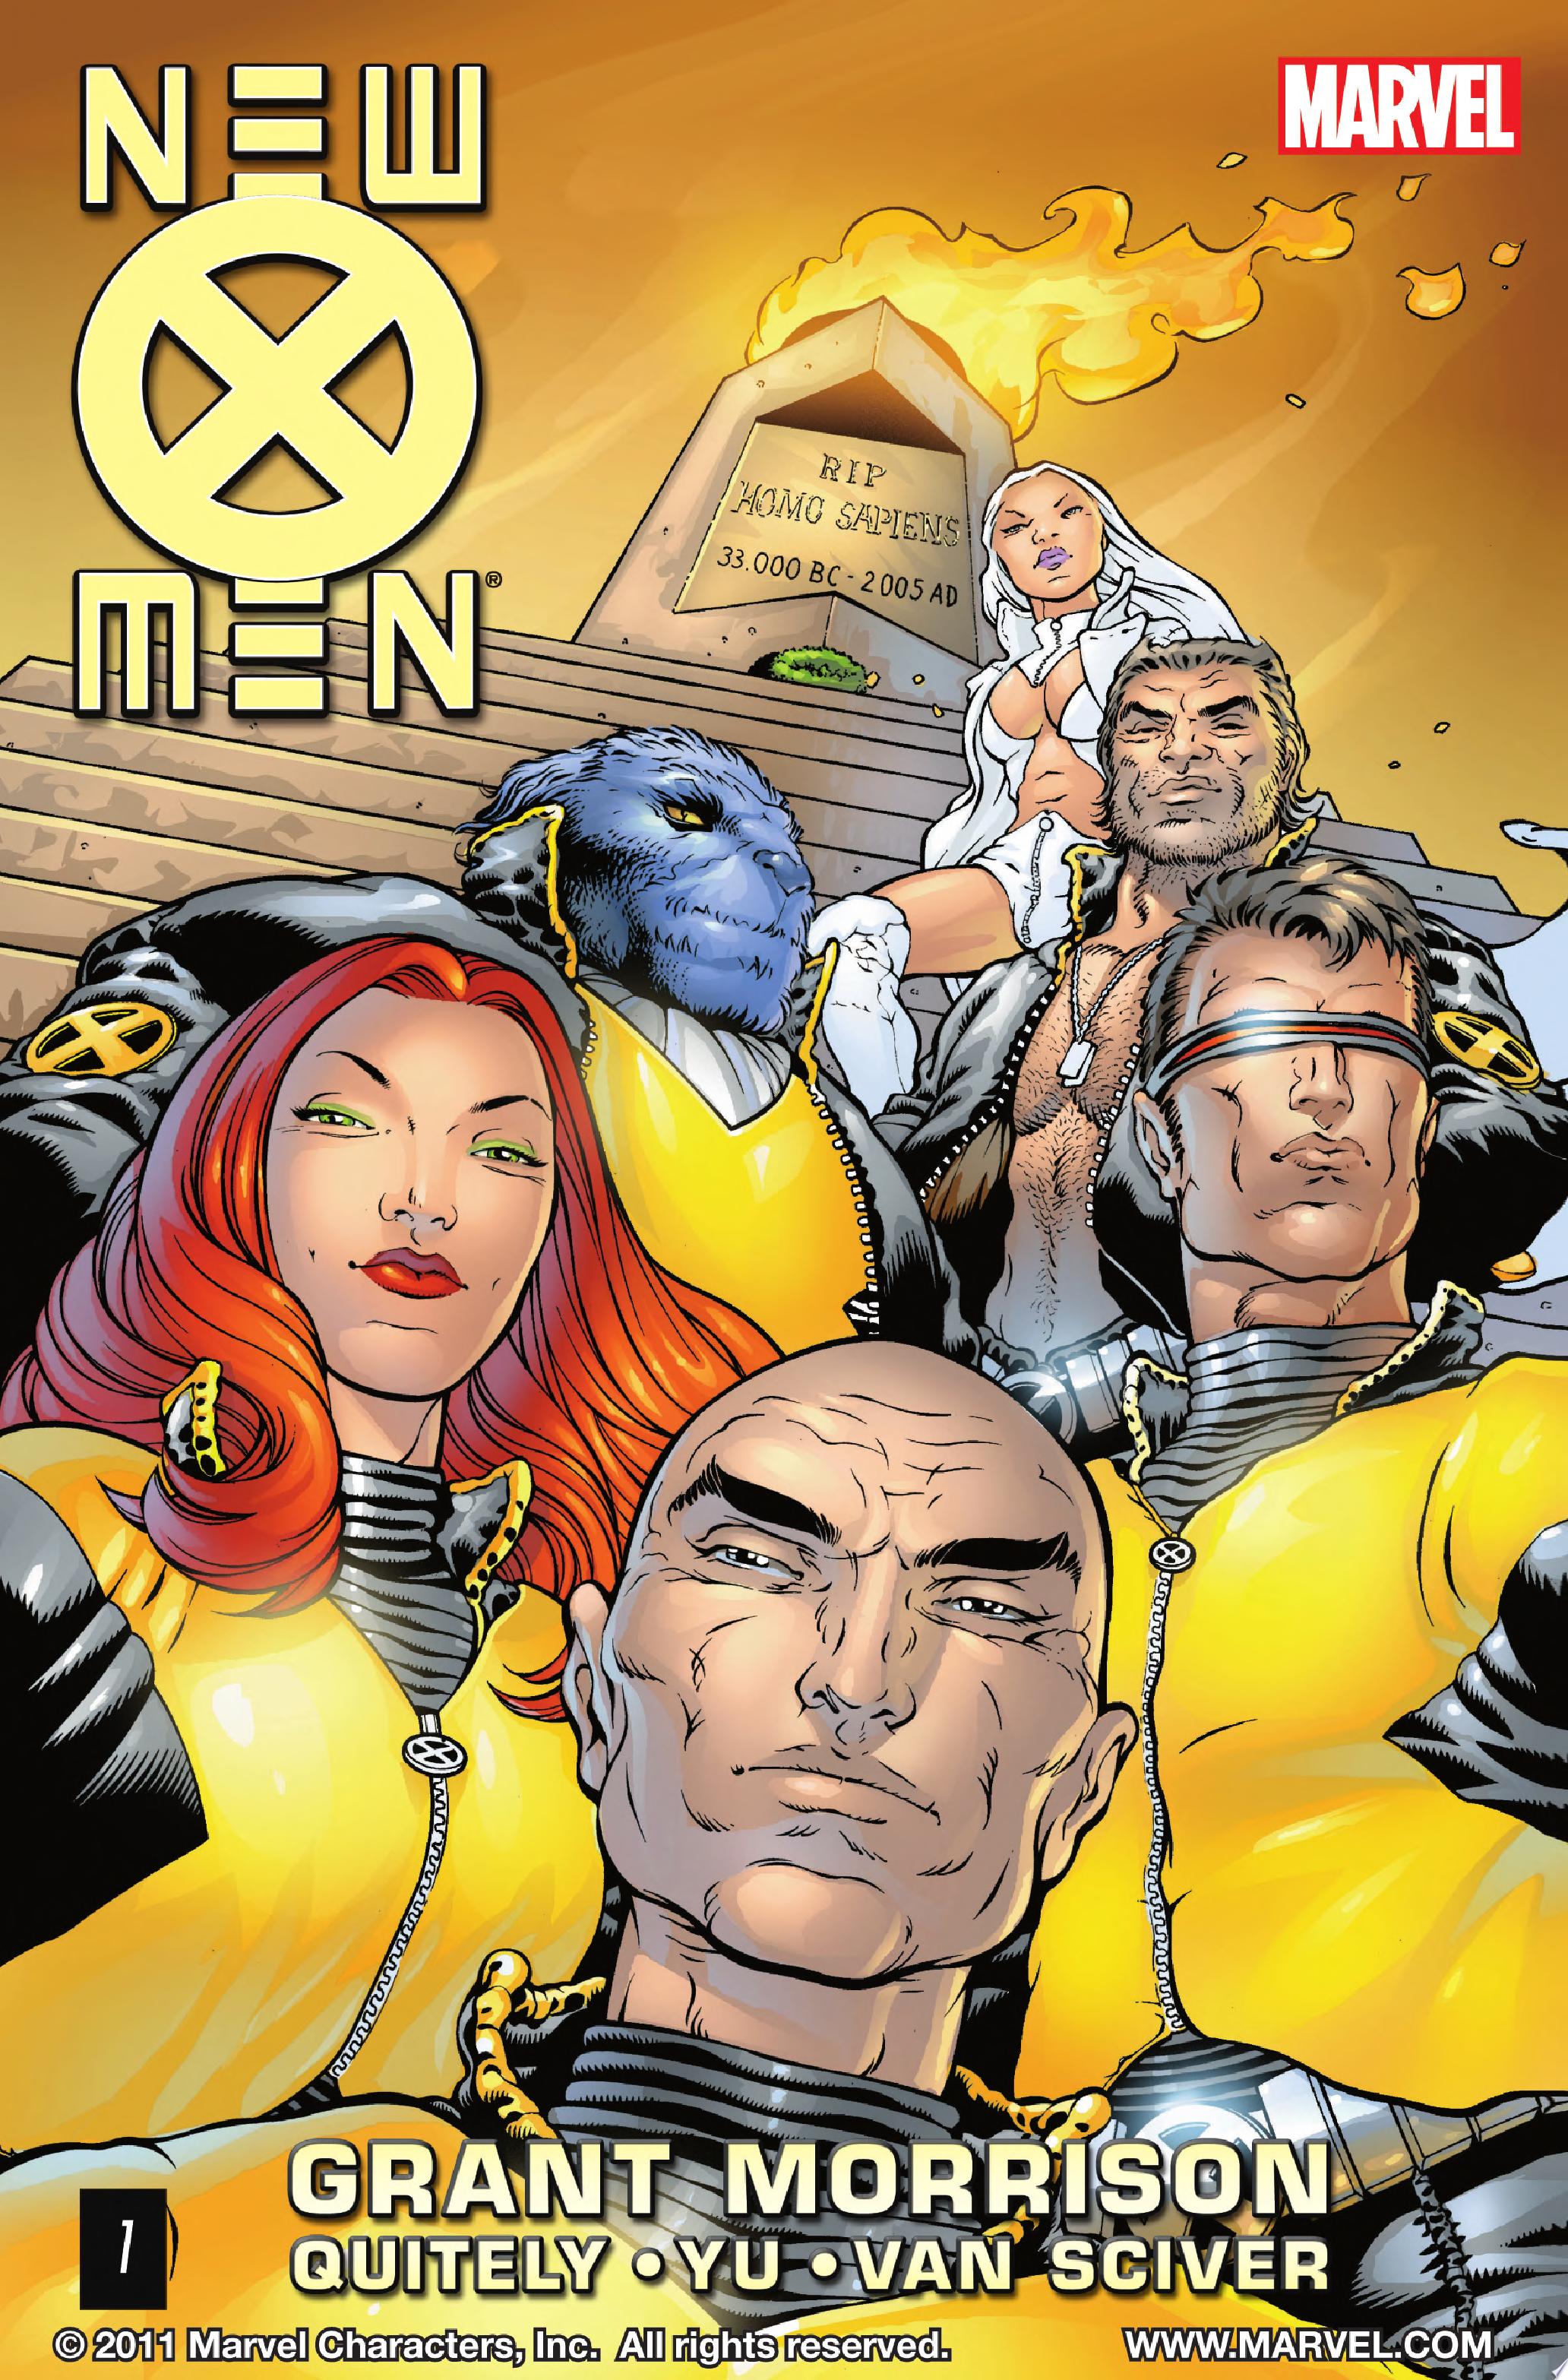 Image for "New X-Men by Grant Morrison Vol. 1"